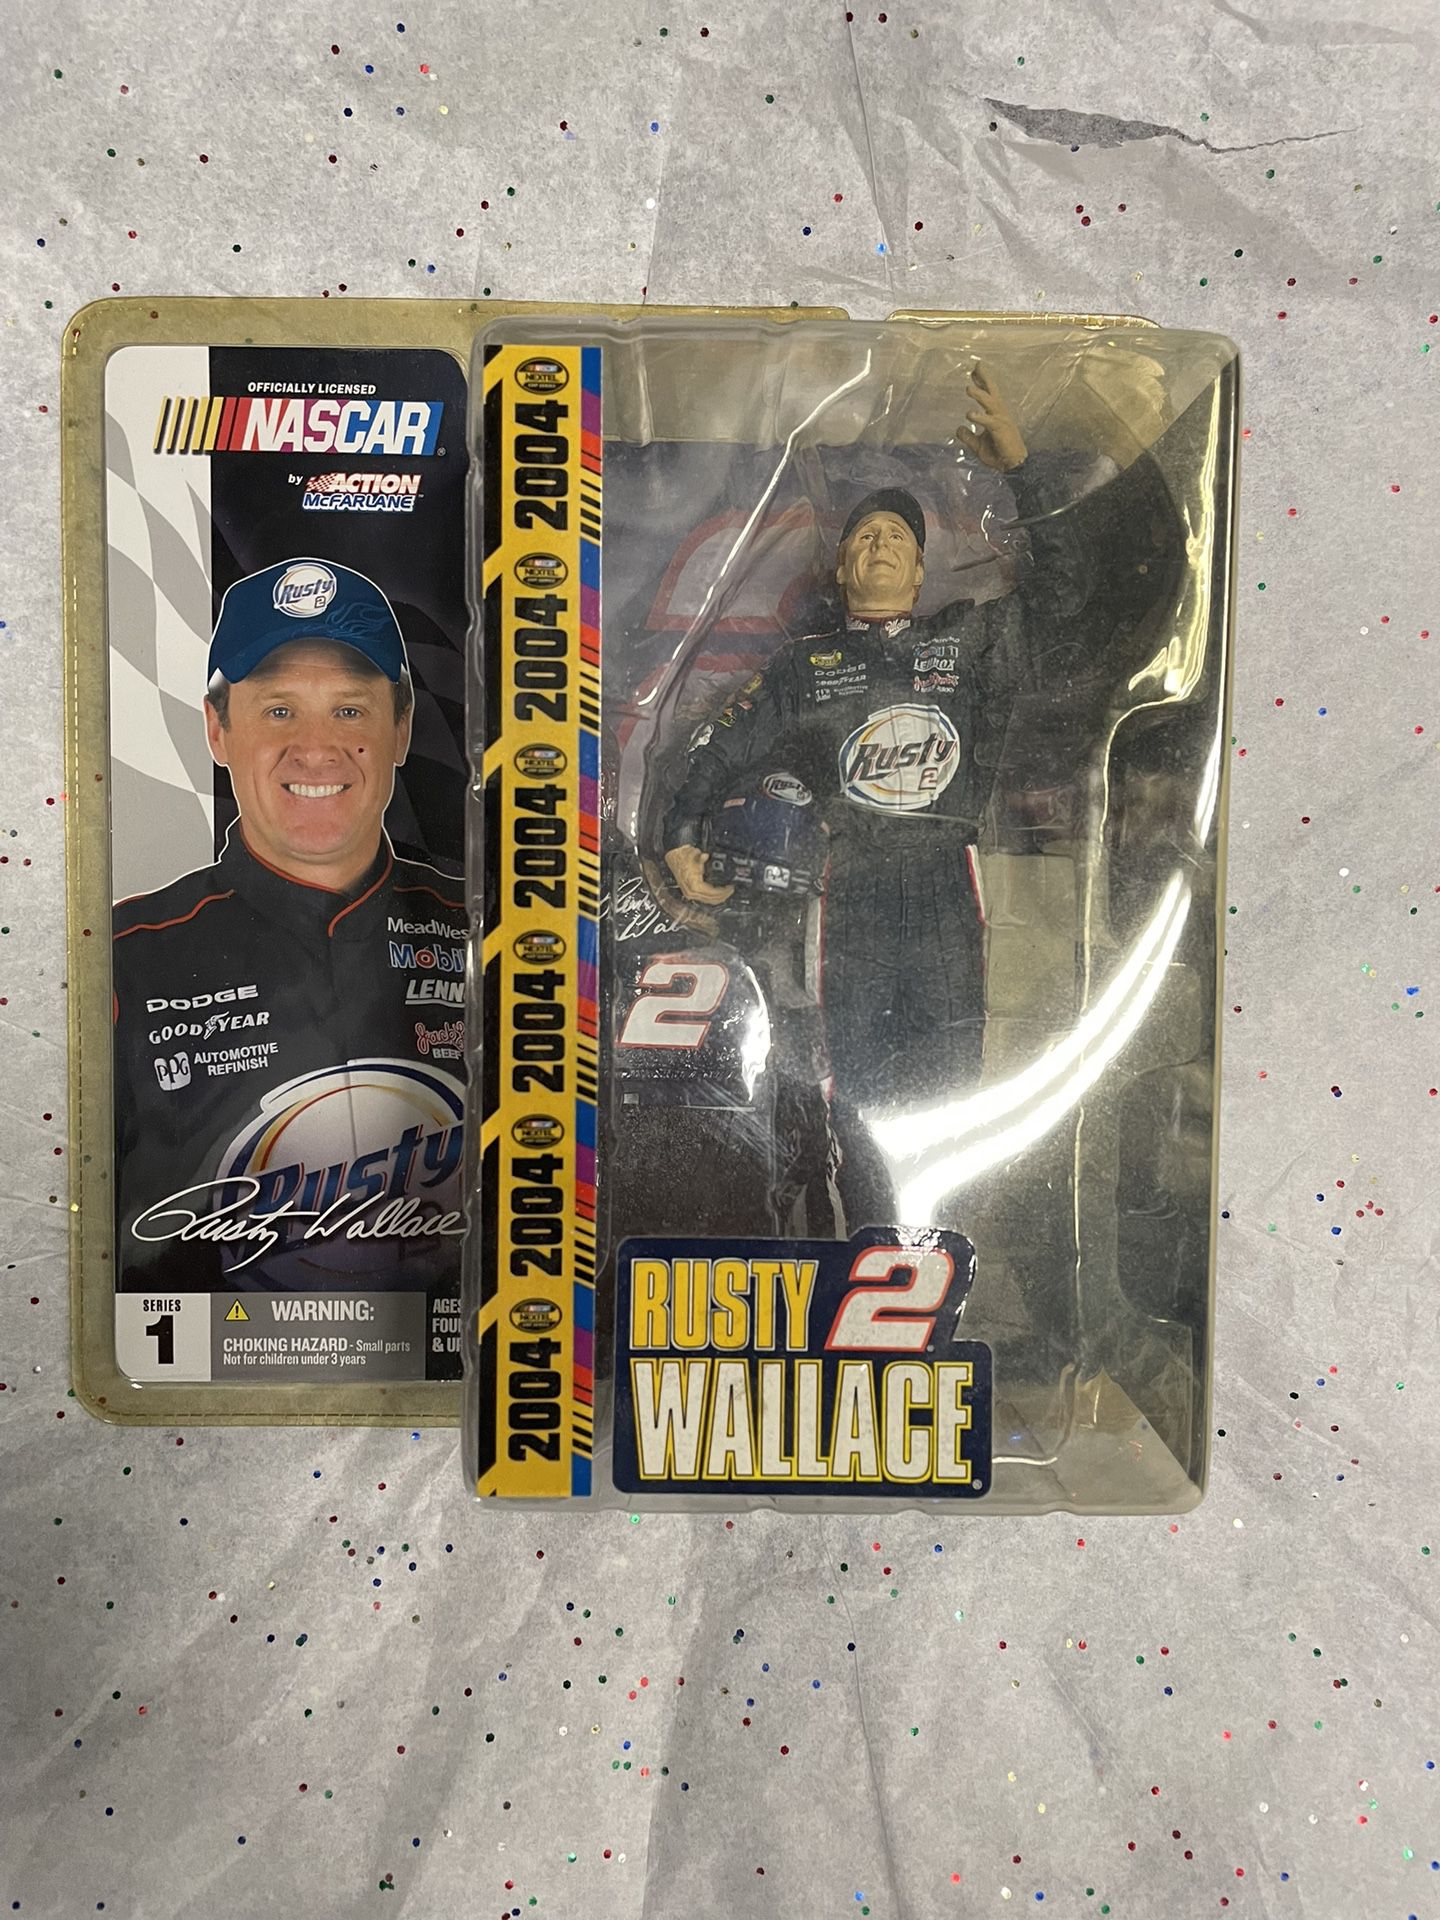 Rusty Wallace #2 Nascar 2004 Action Figure 